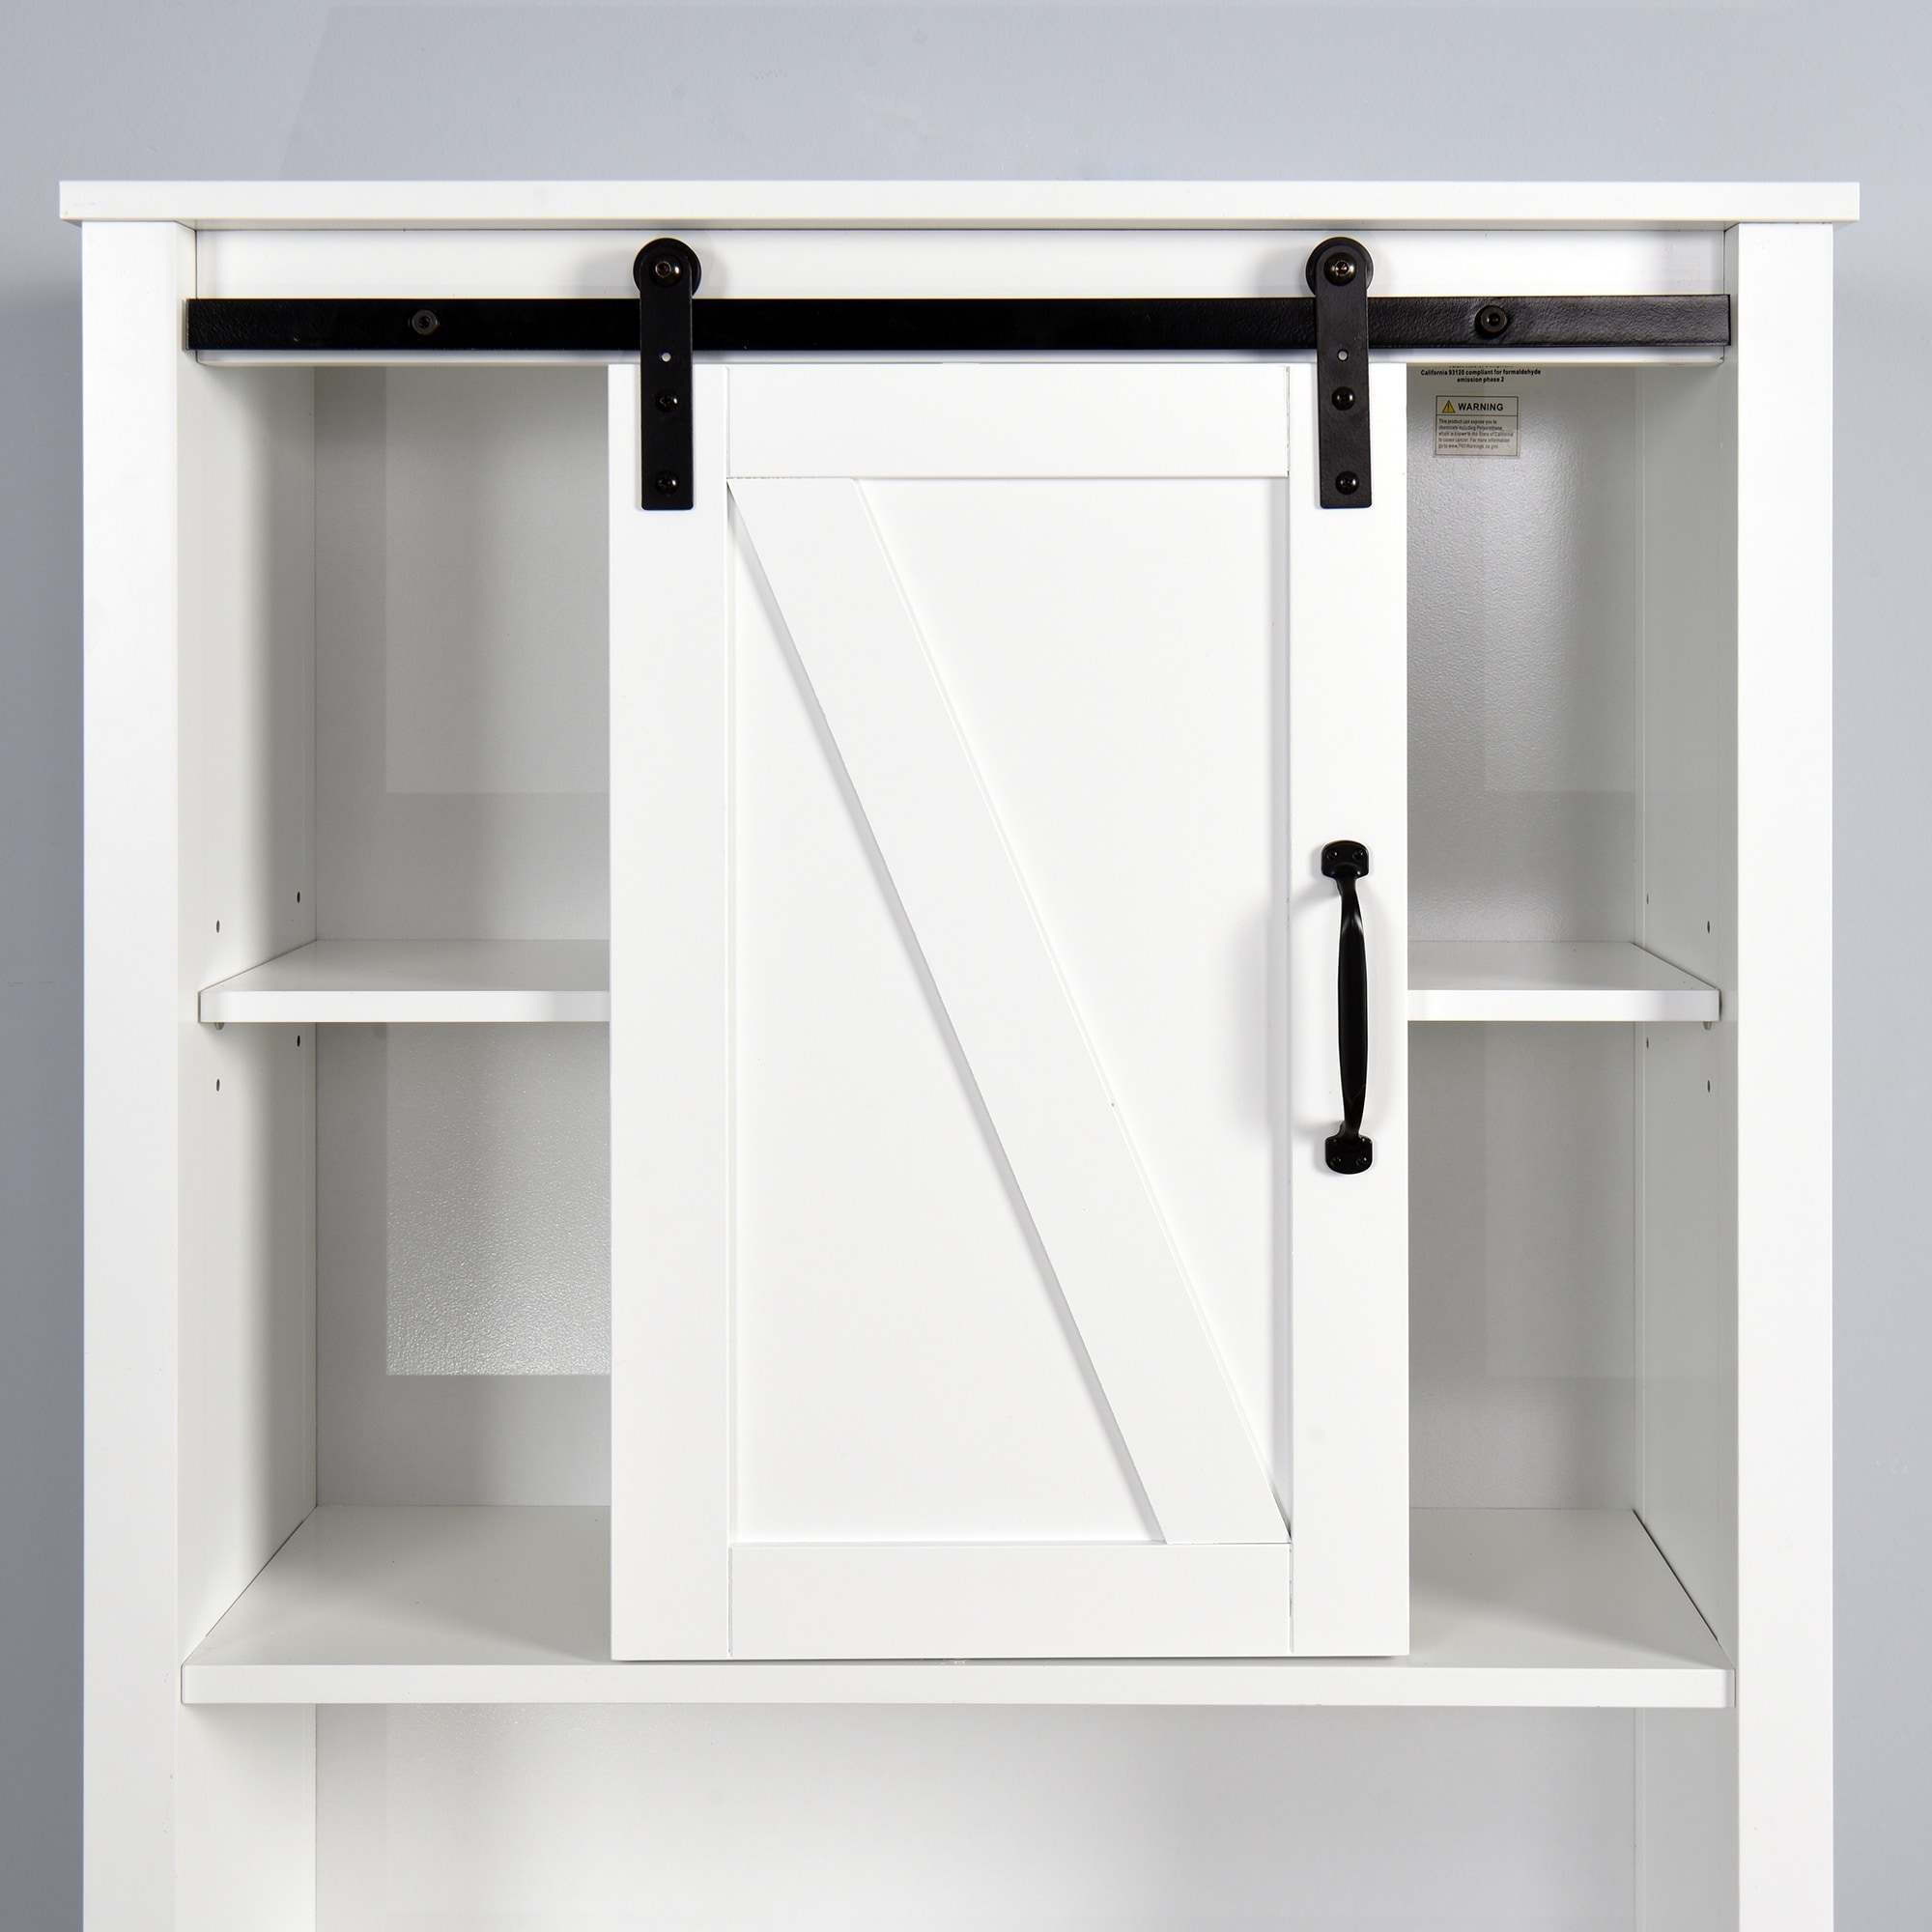 https://ak1.ostkcdn.com/images/products/is/images/direct/1c4a3785a20bcfac9dfd2bdcd5de5f6afb46fb56/Over-the-Toilet-Storage-Cabinet%2C-Space-Saving-Bathroom-Cabinet%2C-with-Adjustable-Shelves-and-A-Barn-Door-27.16-x-9.06-x-67-inch.jpg